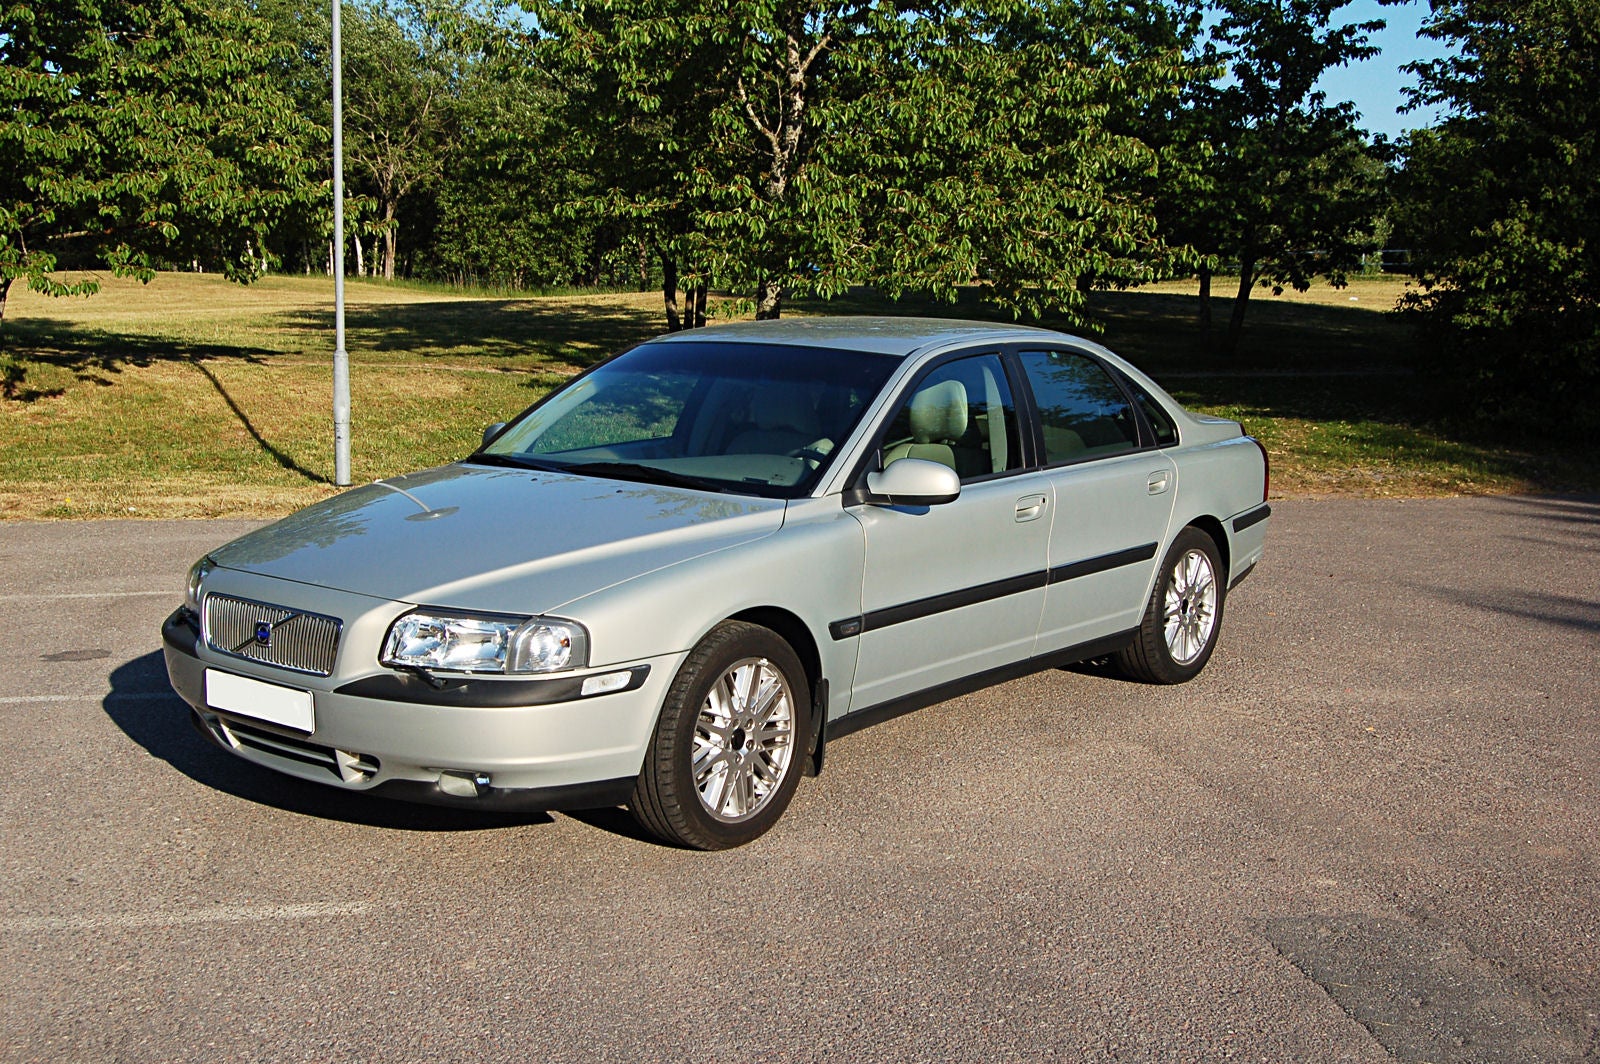 Volvo   on 2000 Volvo S80   Pictures   2000 Volvo S80 T6 Picture   Cargurus